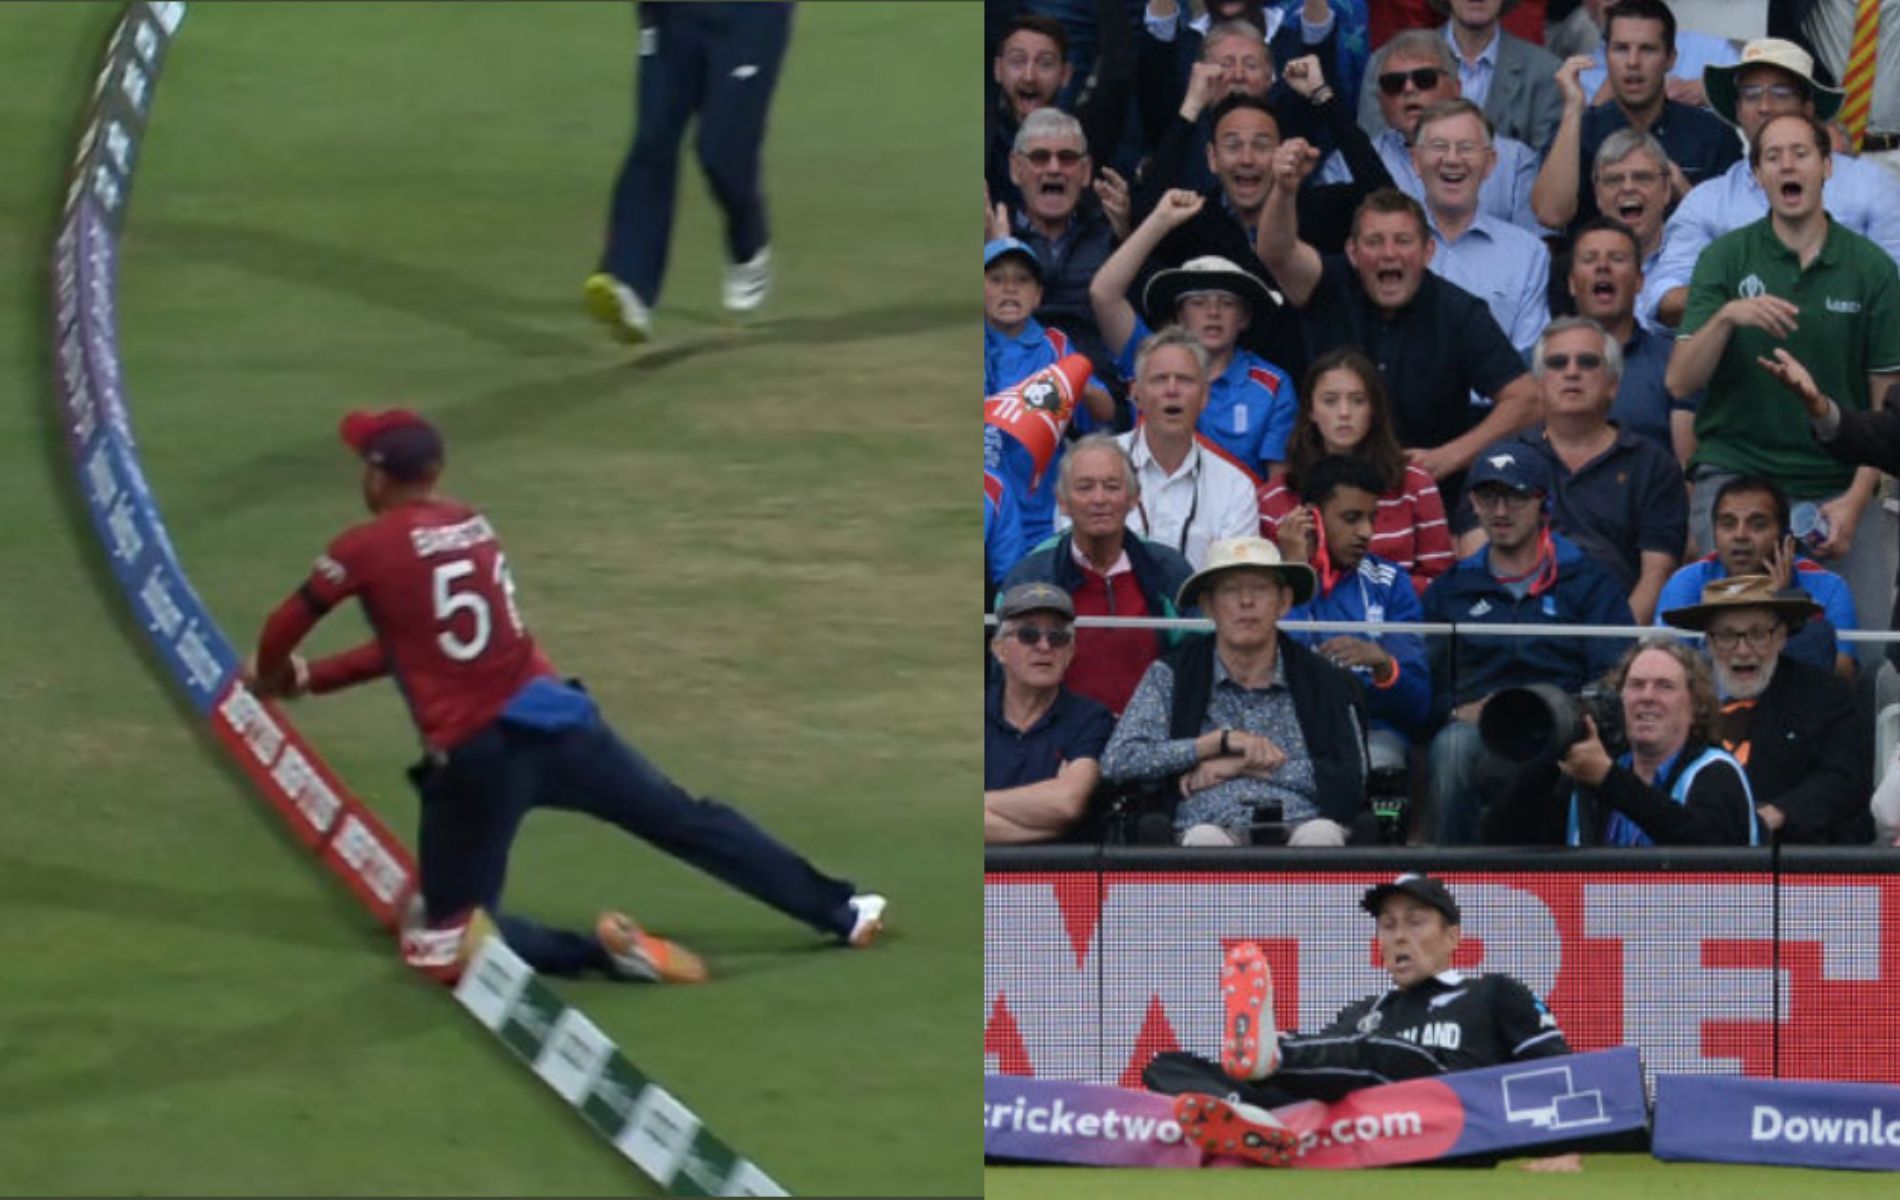 Jonny Bairstow in the 2021 T20 World Cup semi-final had a moment like Trent Boult&#039;s in the 2019 World Cup final.